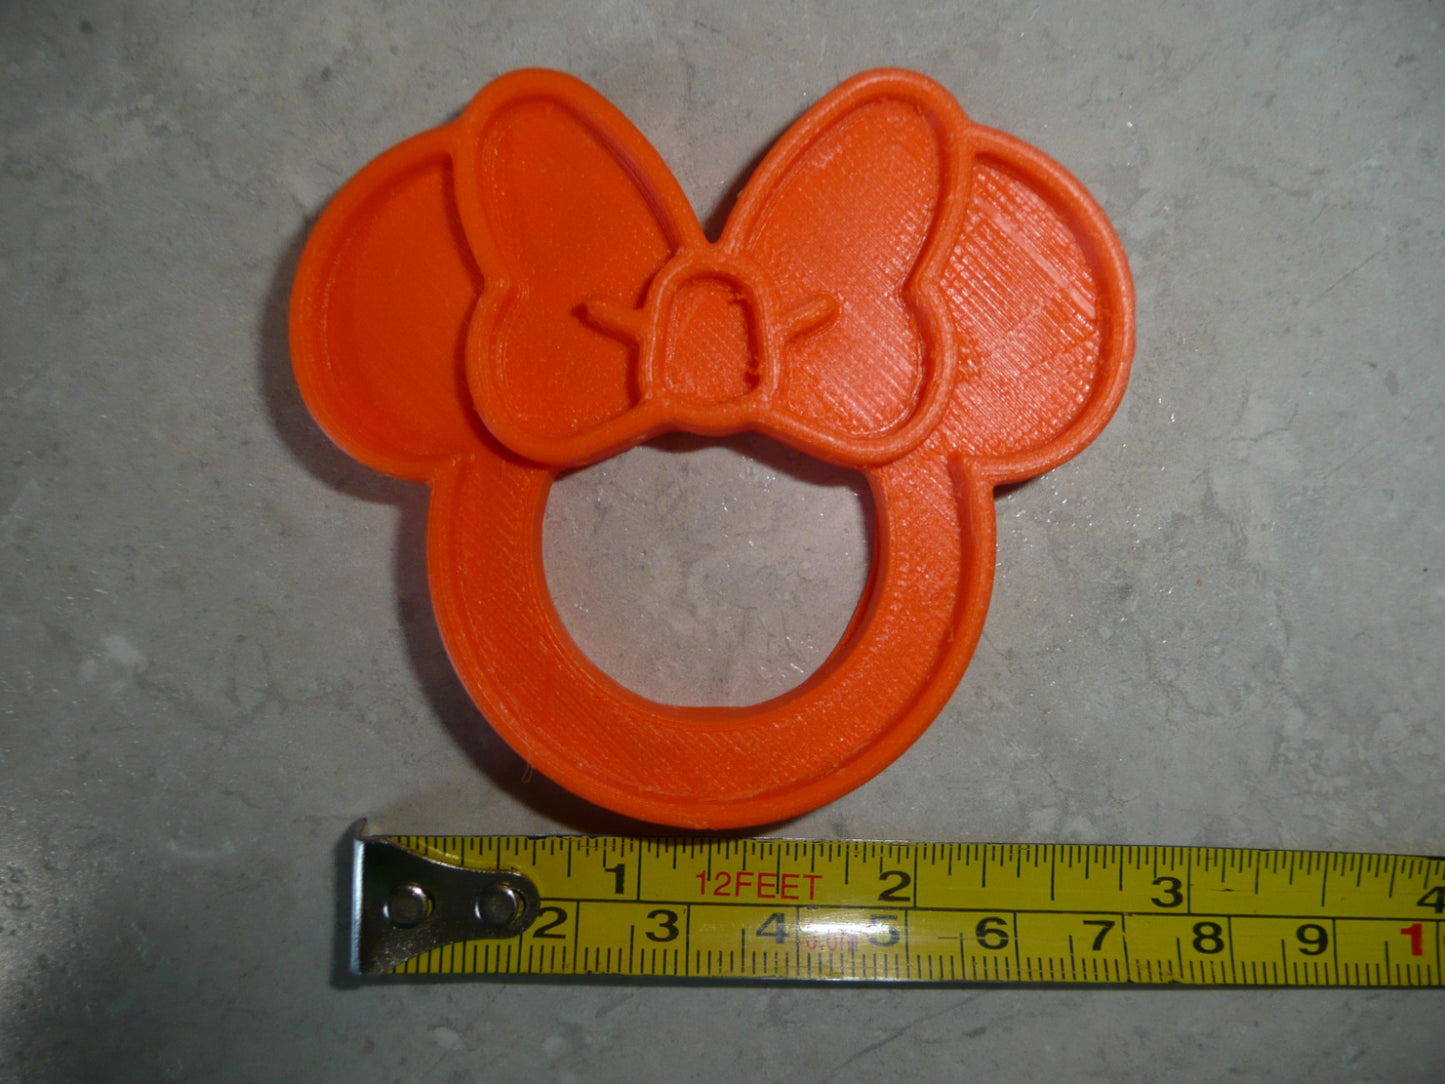 Minnie Mouse Themed Orange Napkin Ring Holders Set Of 4 Made In USA PR4809